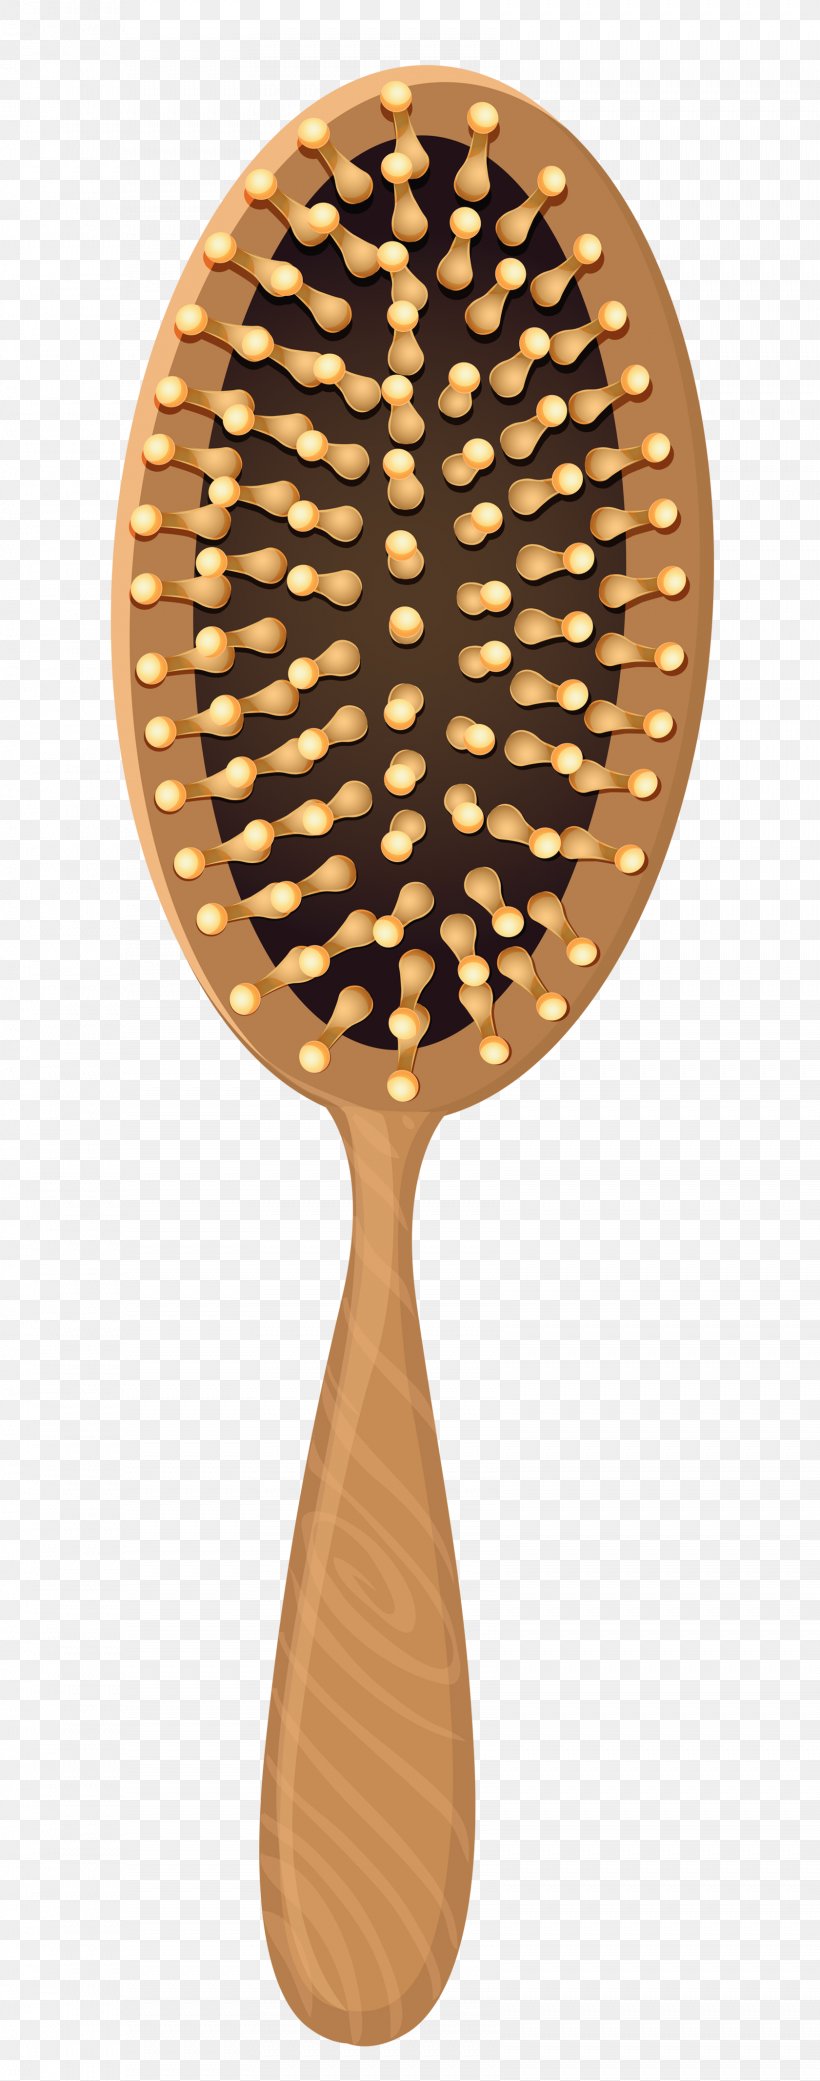 Comb Hairbrush Clip Art, PNG, 1681x4268px, Comb, Barrette, Brush, Cutlery, Hair Download Free